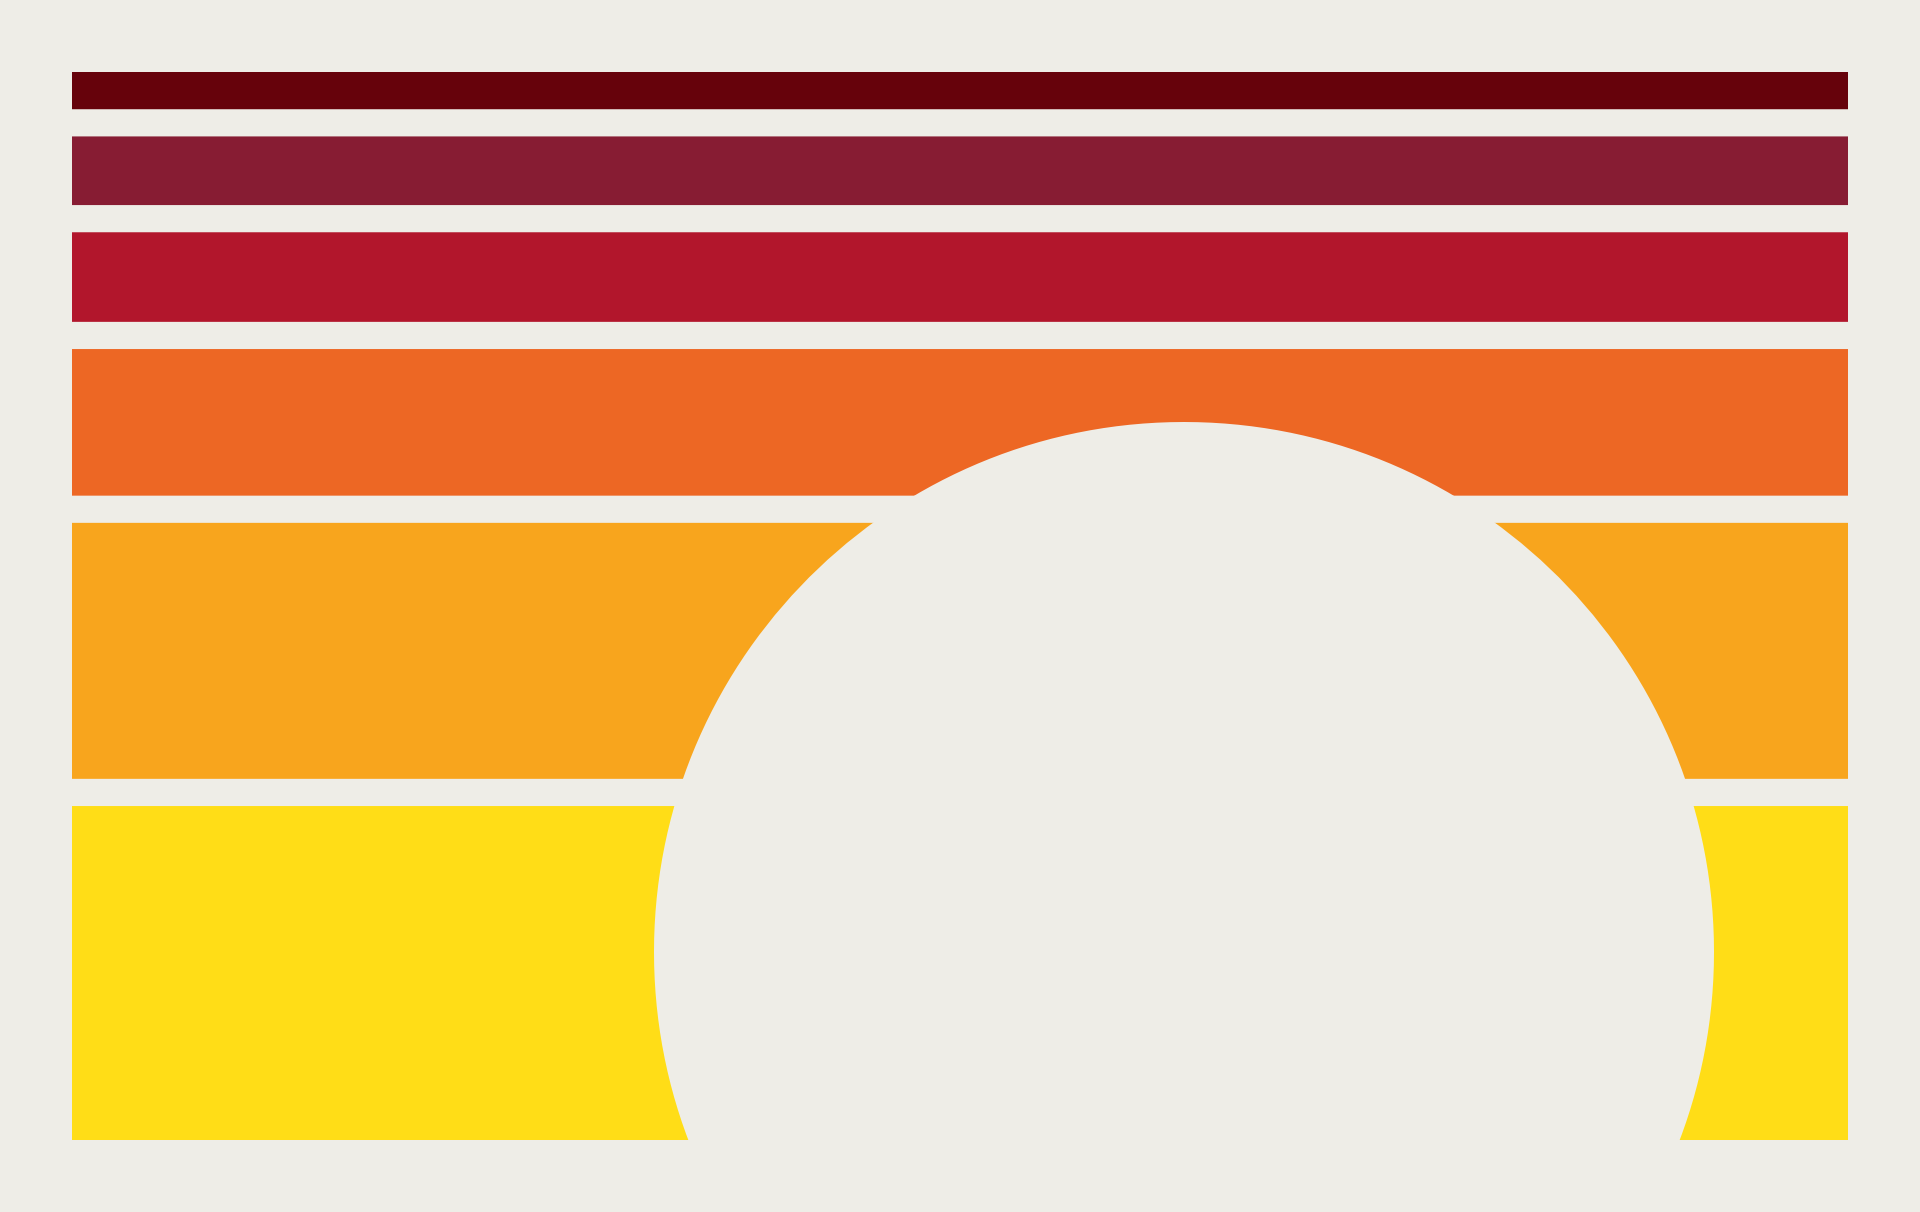 Clickable graphic that resembles a sunset